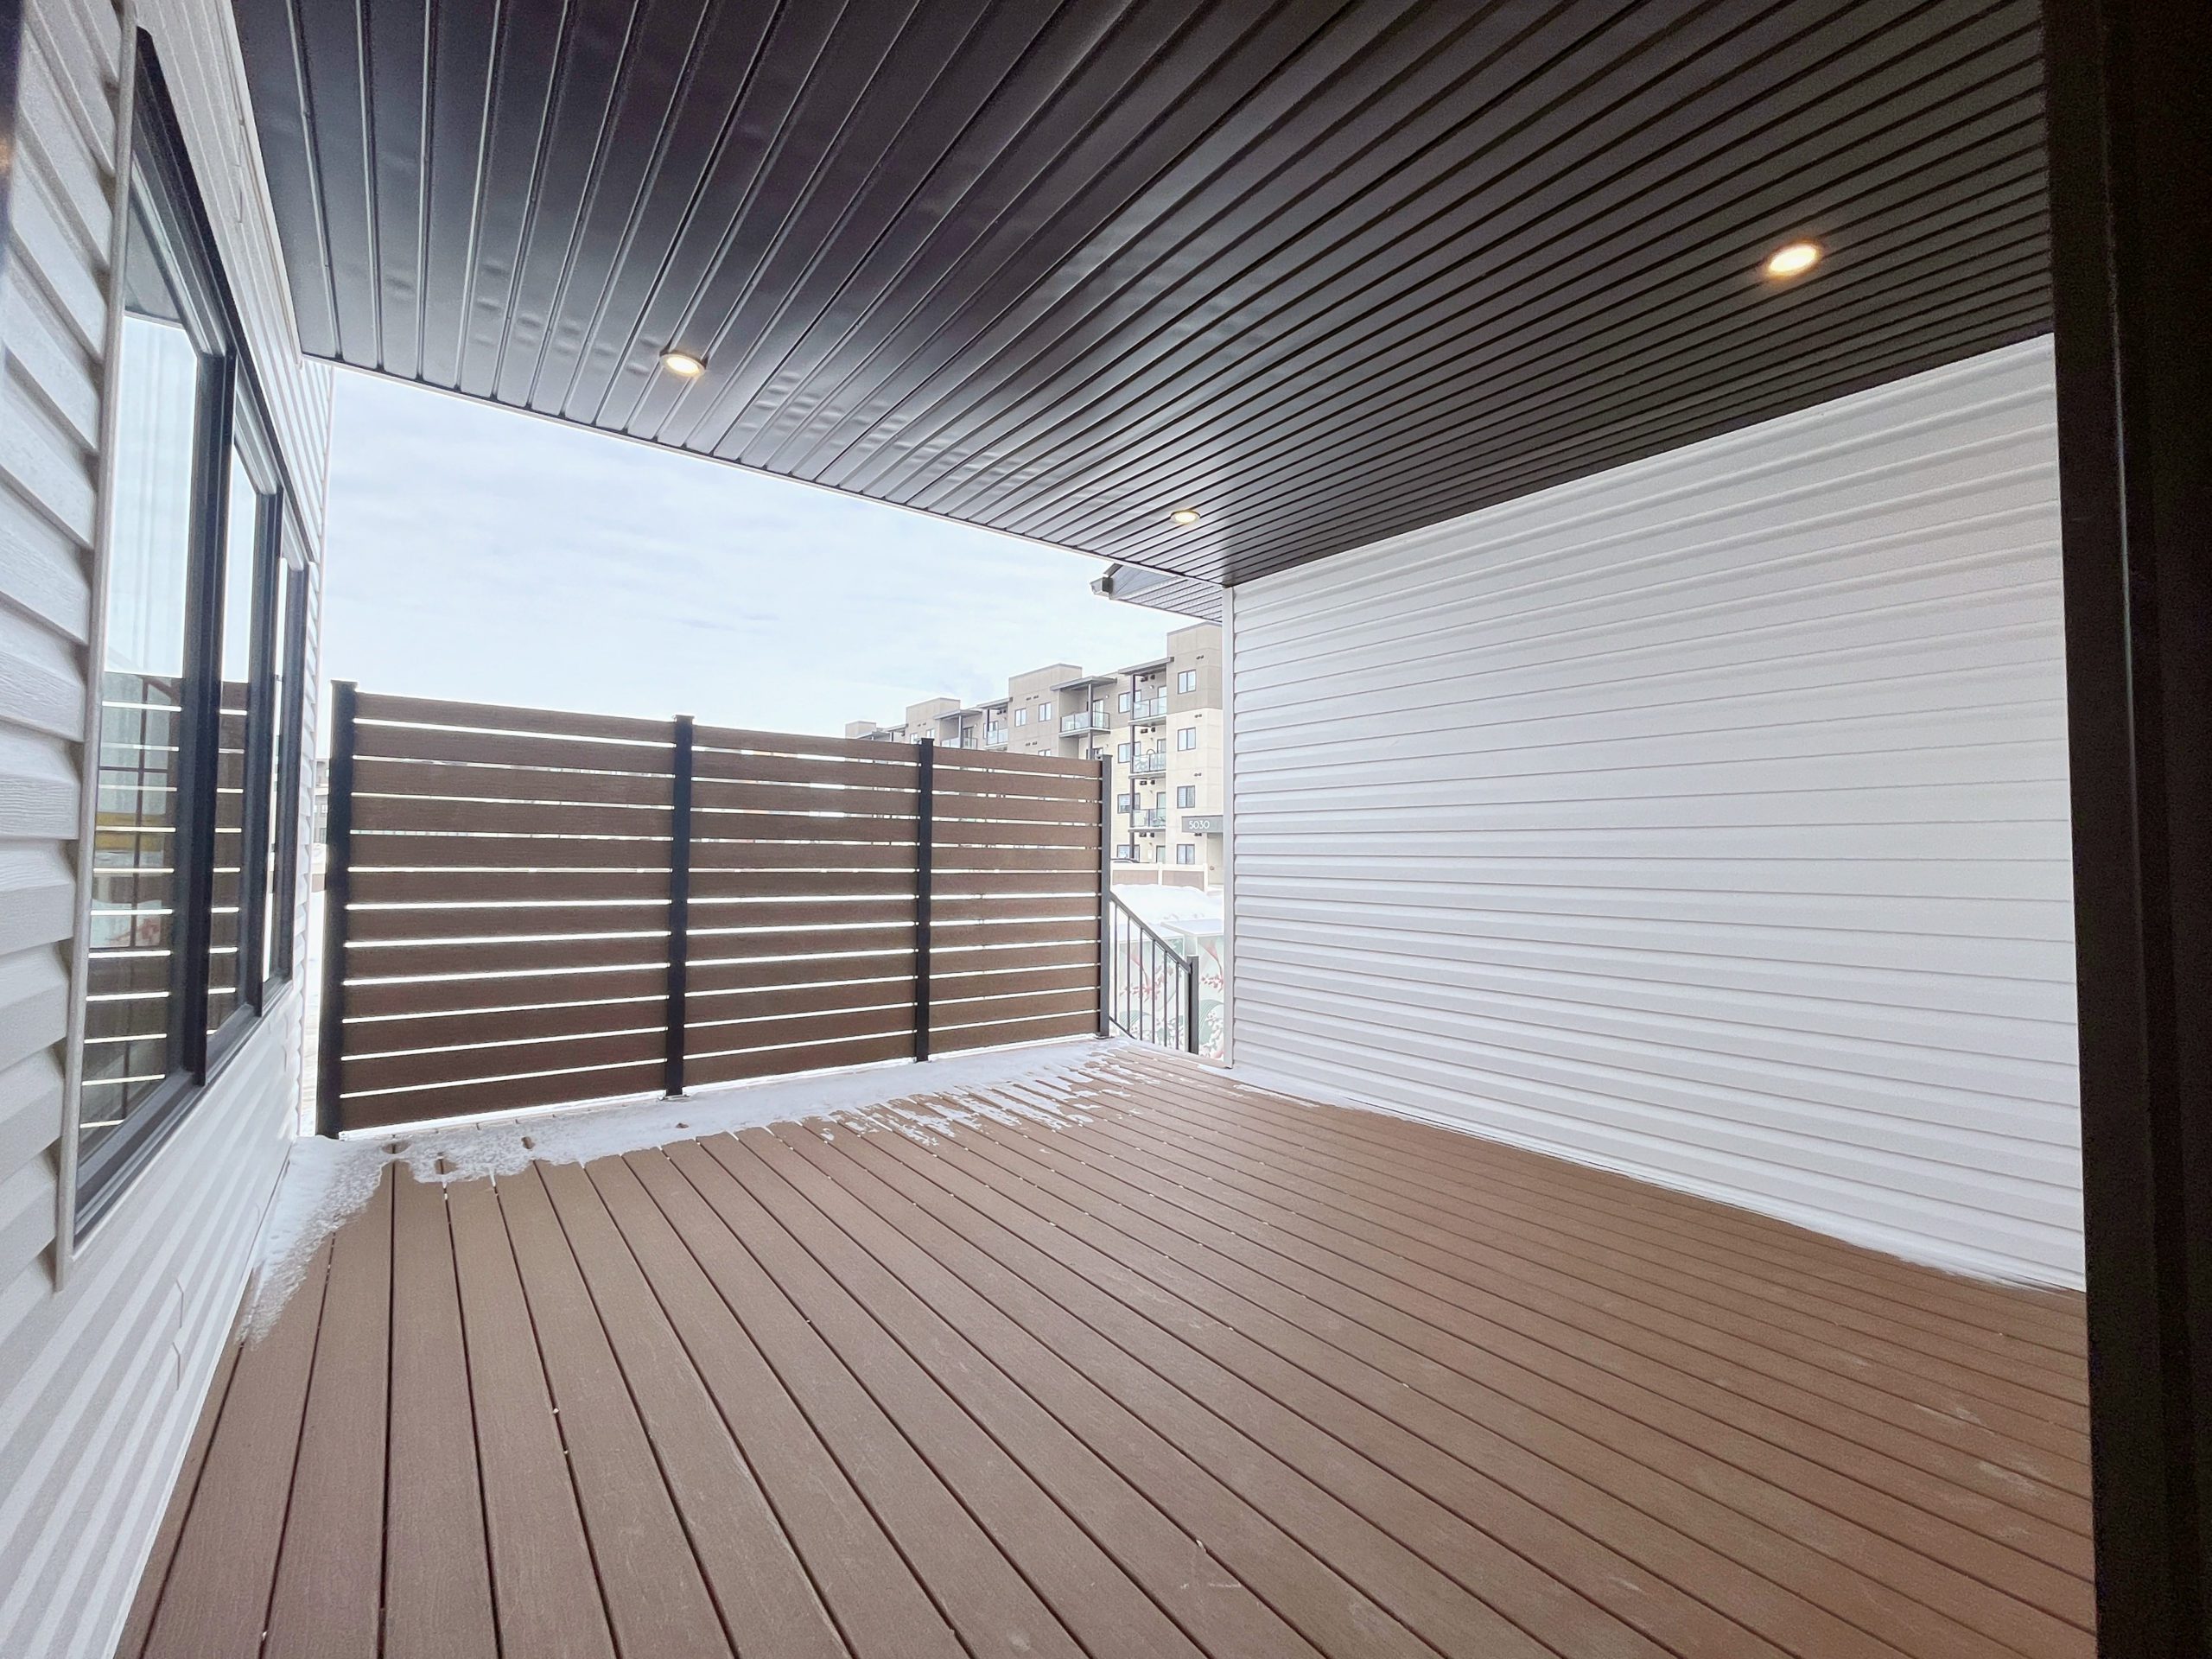 The exterior covered composite deck with privacy wall.